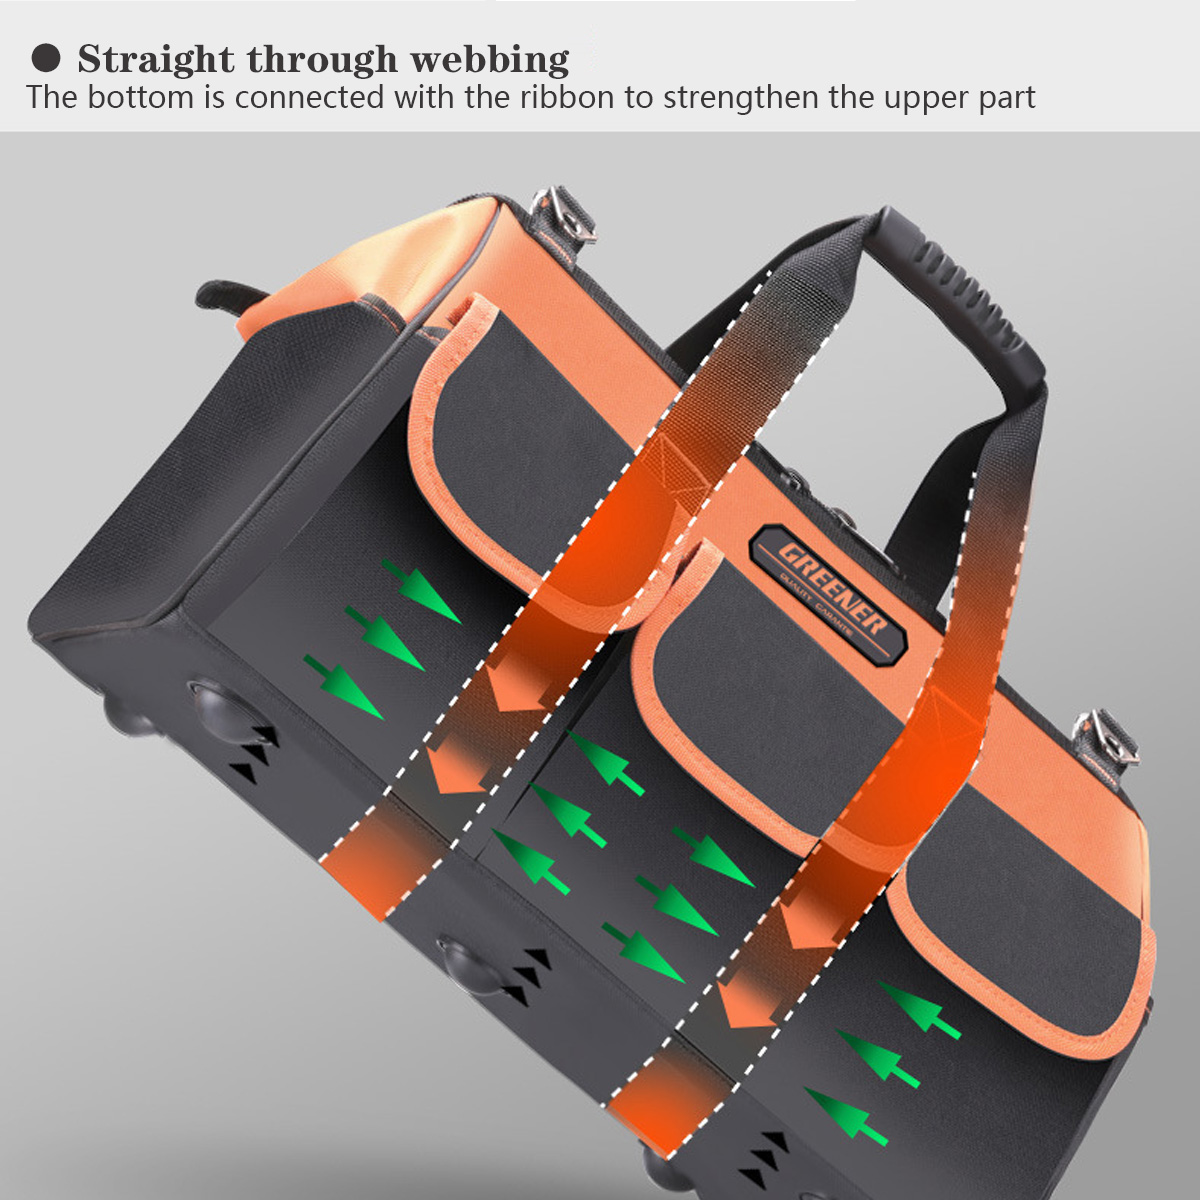 13-20-Heavy-Duty-Electrician-Tool-Bags-Tool-Storage-with-Handle--Shoulder-Strap-1849107-10